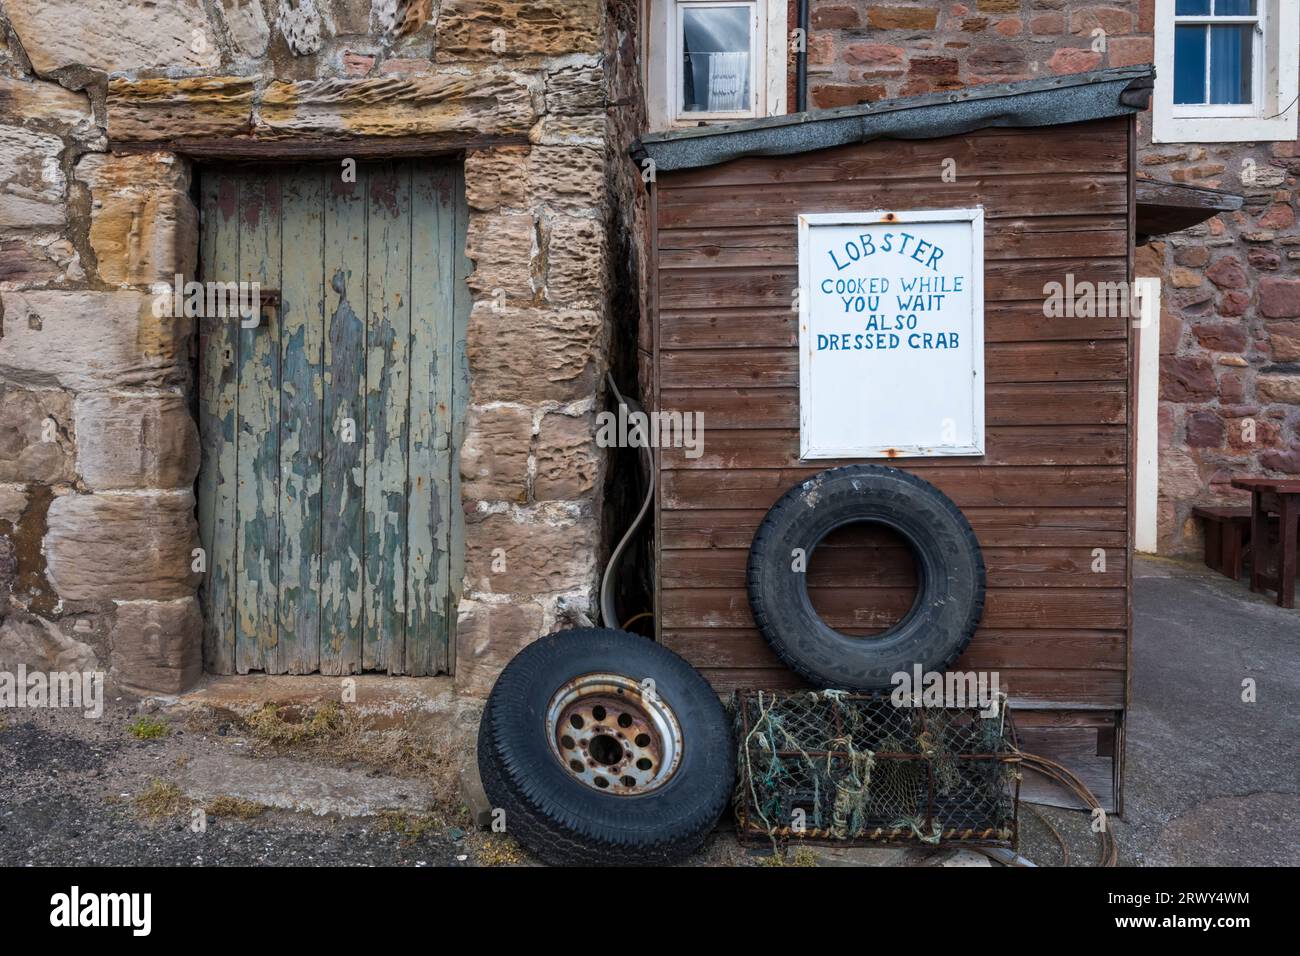 Lobster cooked while you wait sign on a harbour shack at Crail in the East Neuk of Fife, Scotland. Stock Photo